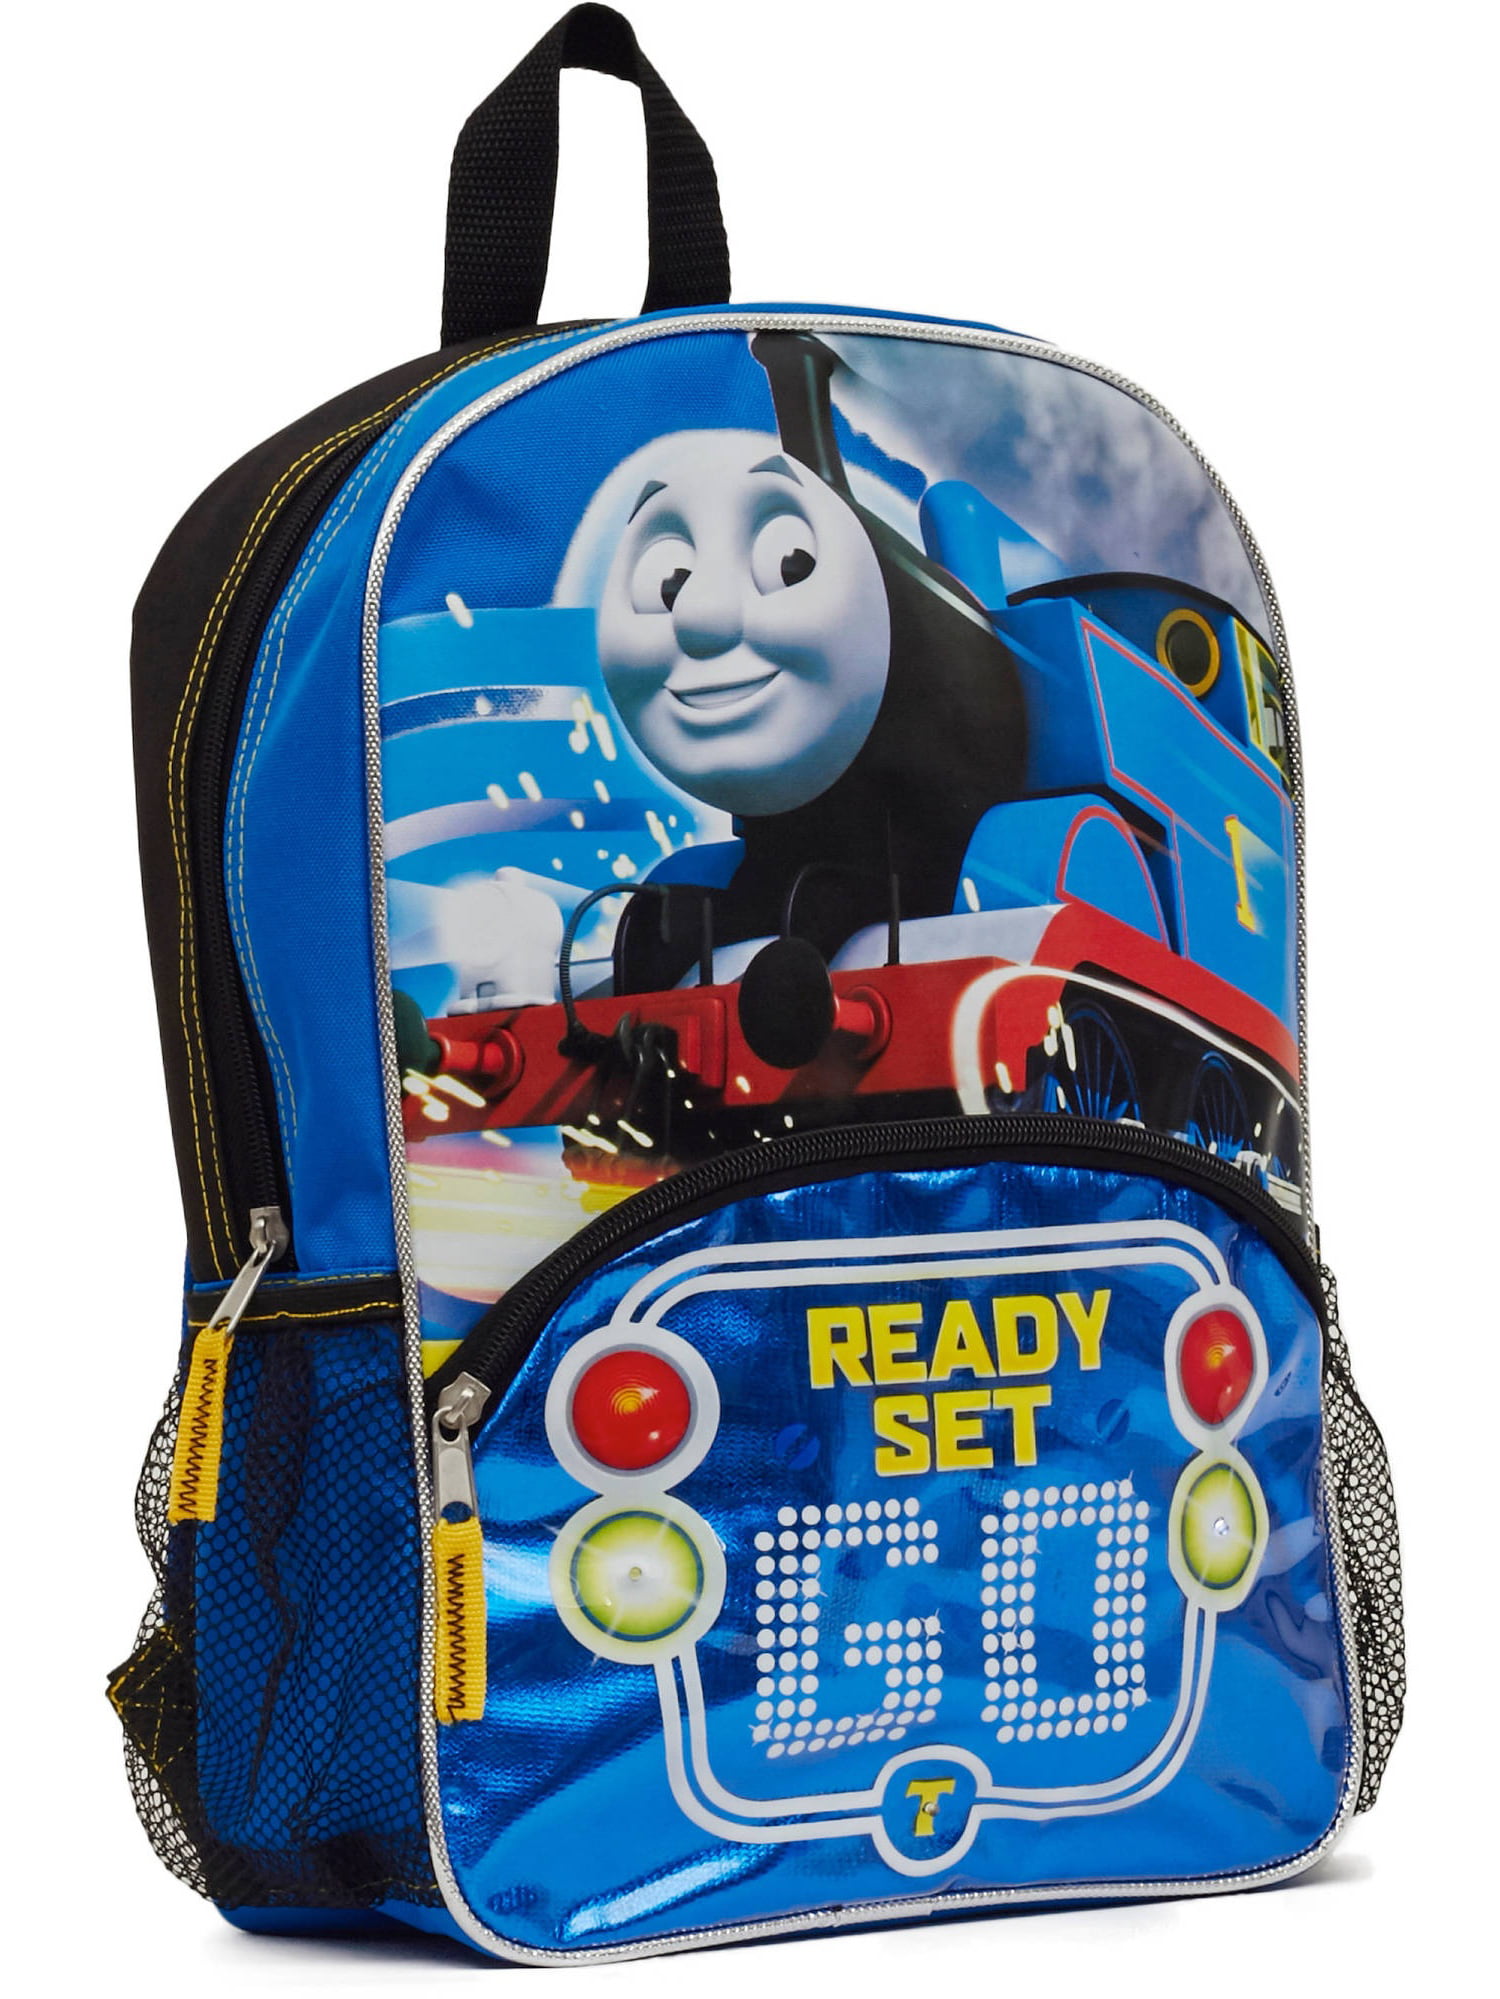 Thomas The Tank Engine Childrens Backpack 32 cm 9 Liters Navy Blue